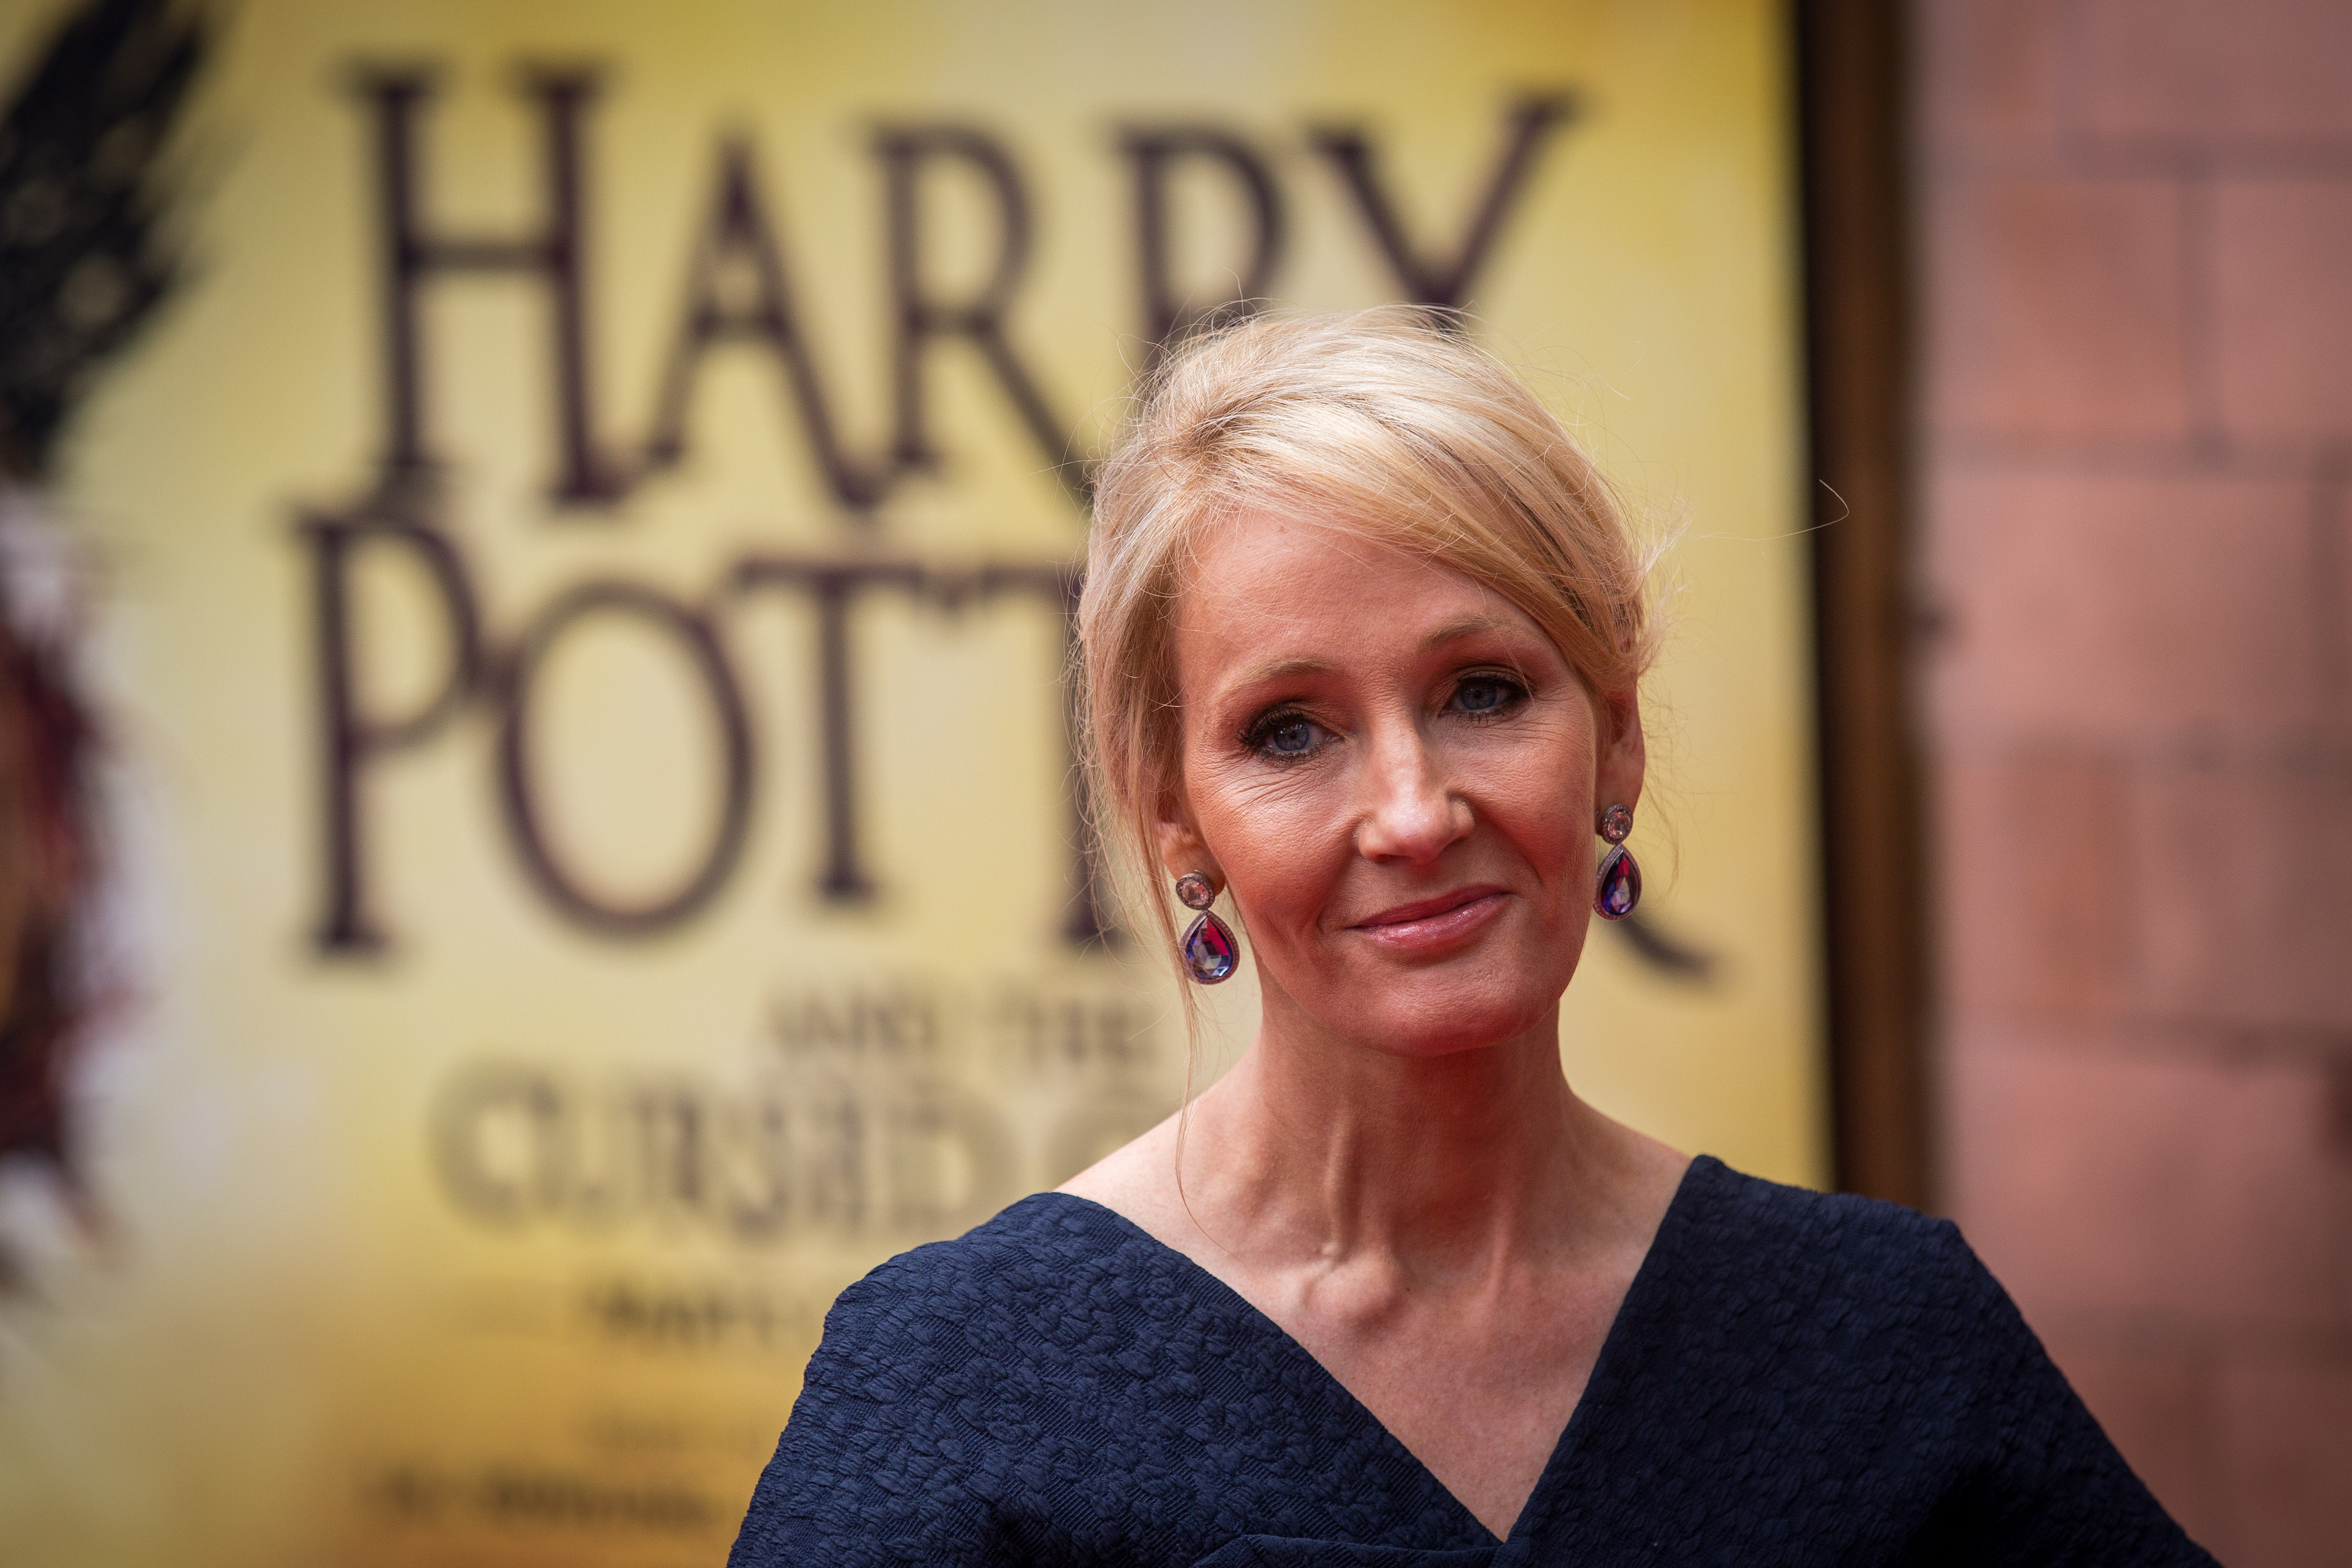 J. K. Rowling attends the press preview of "Harry Potter &amp; The Cursed Child" at Palace Theatre on July 30, 2016 in London, England. (Rob Stothard—Getty Images)